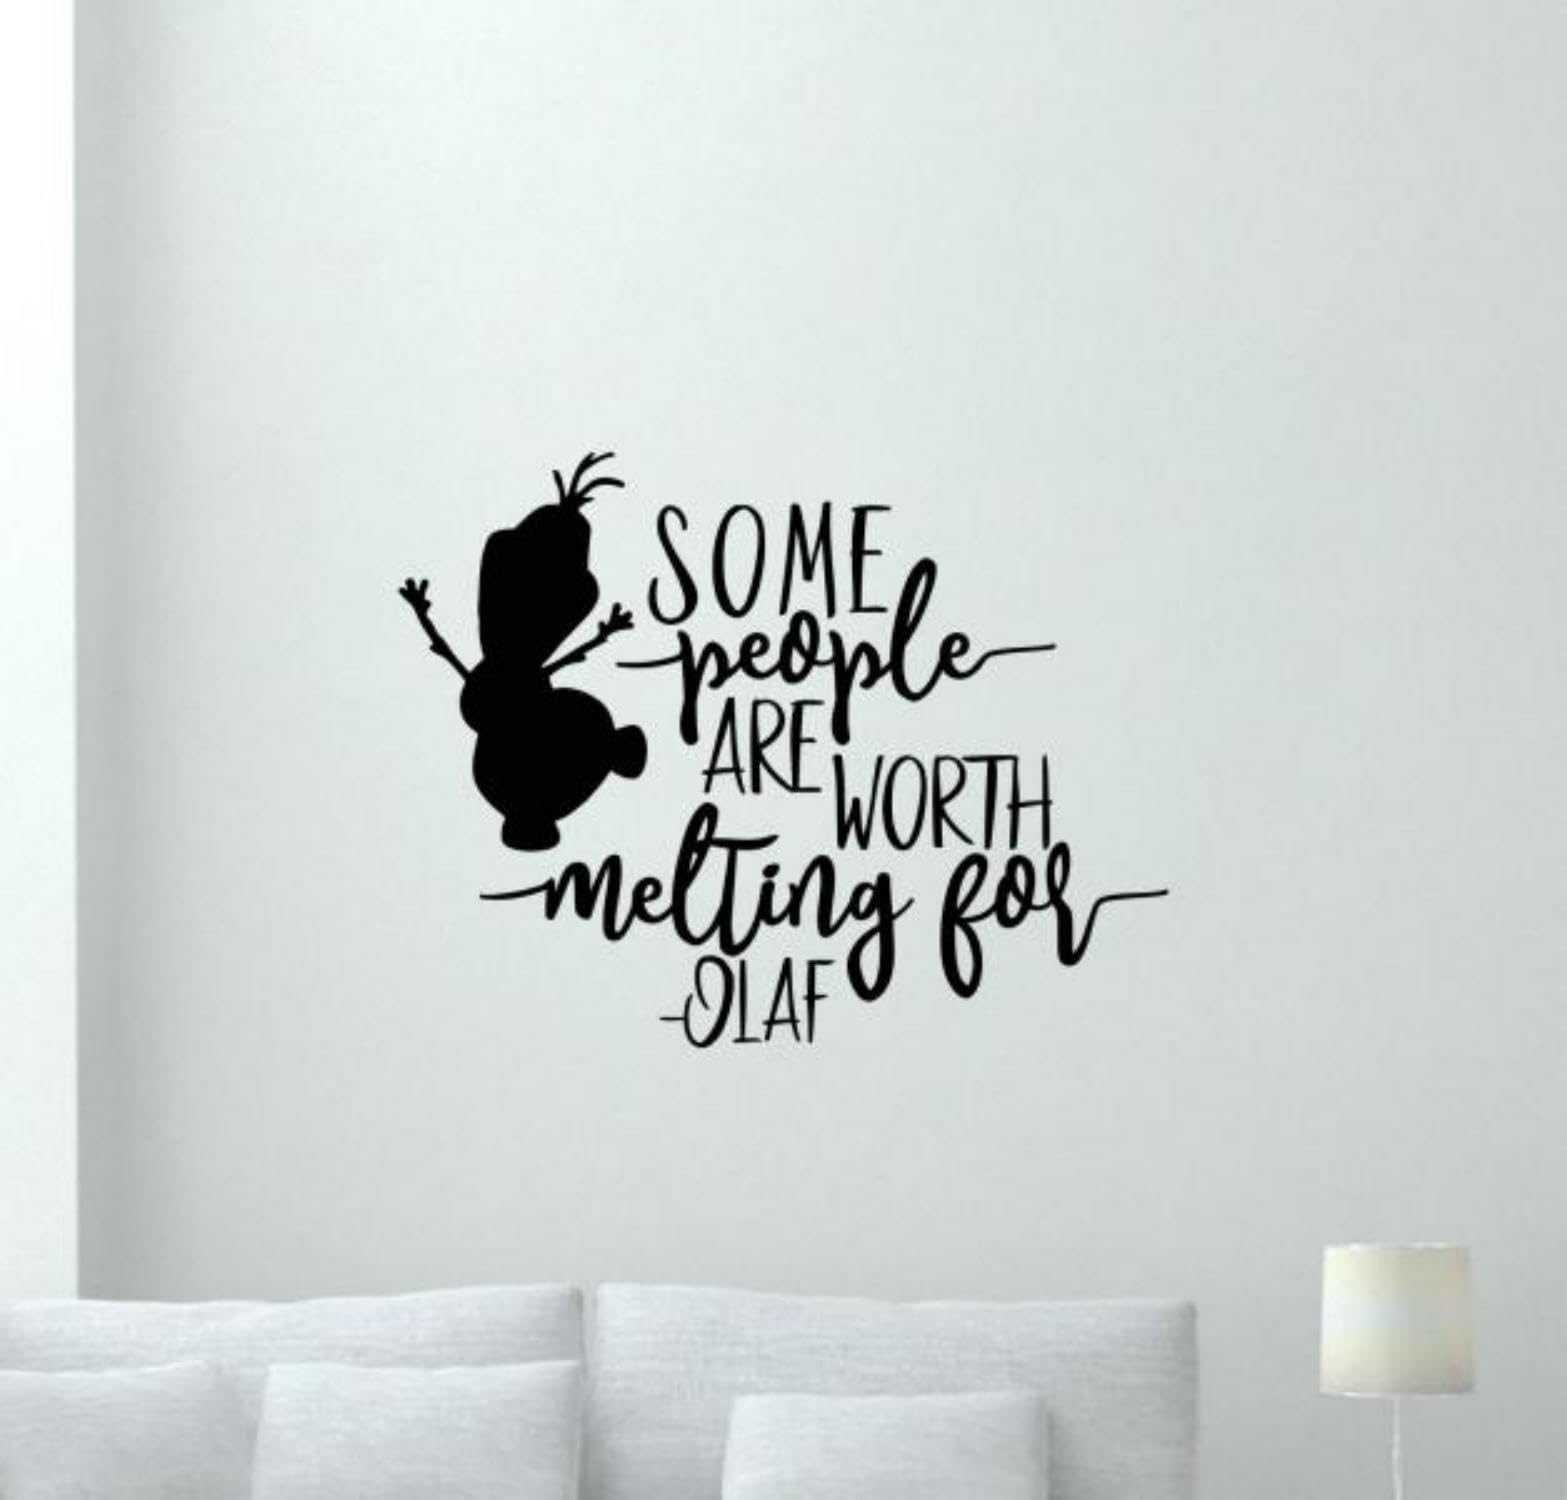 Some people are worth melting for olaf wall decal vinyl sticker wall art decor car truck bedroom living room poster sign stencil mural die cut no background indoor outdoor decal